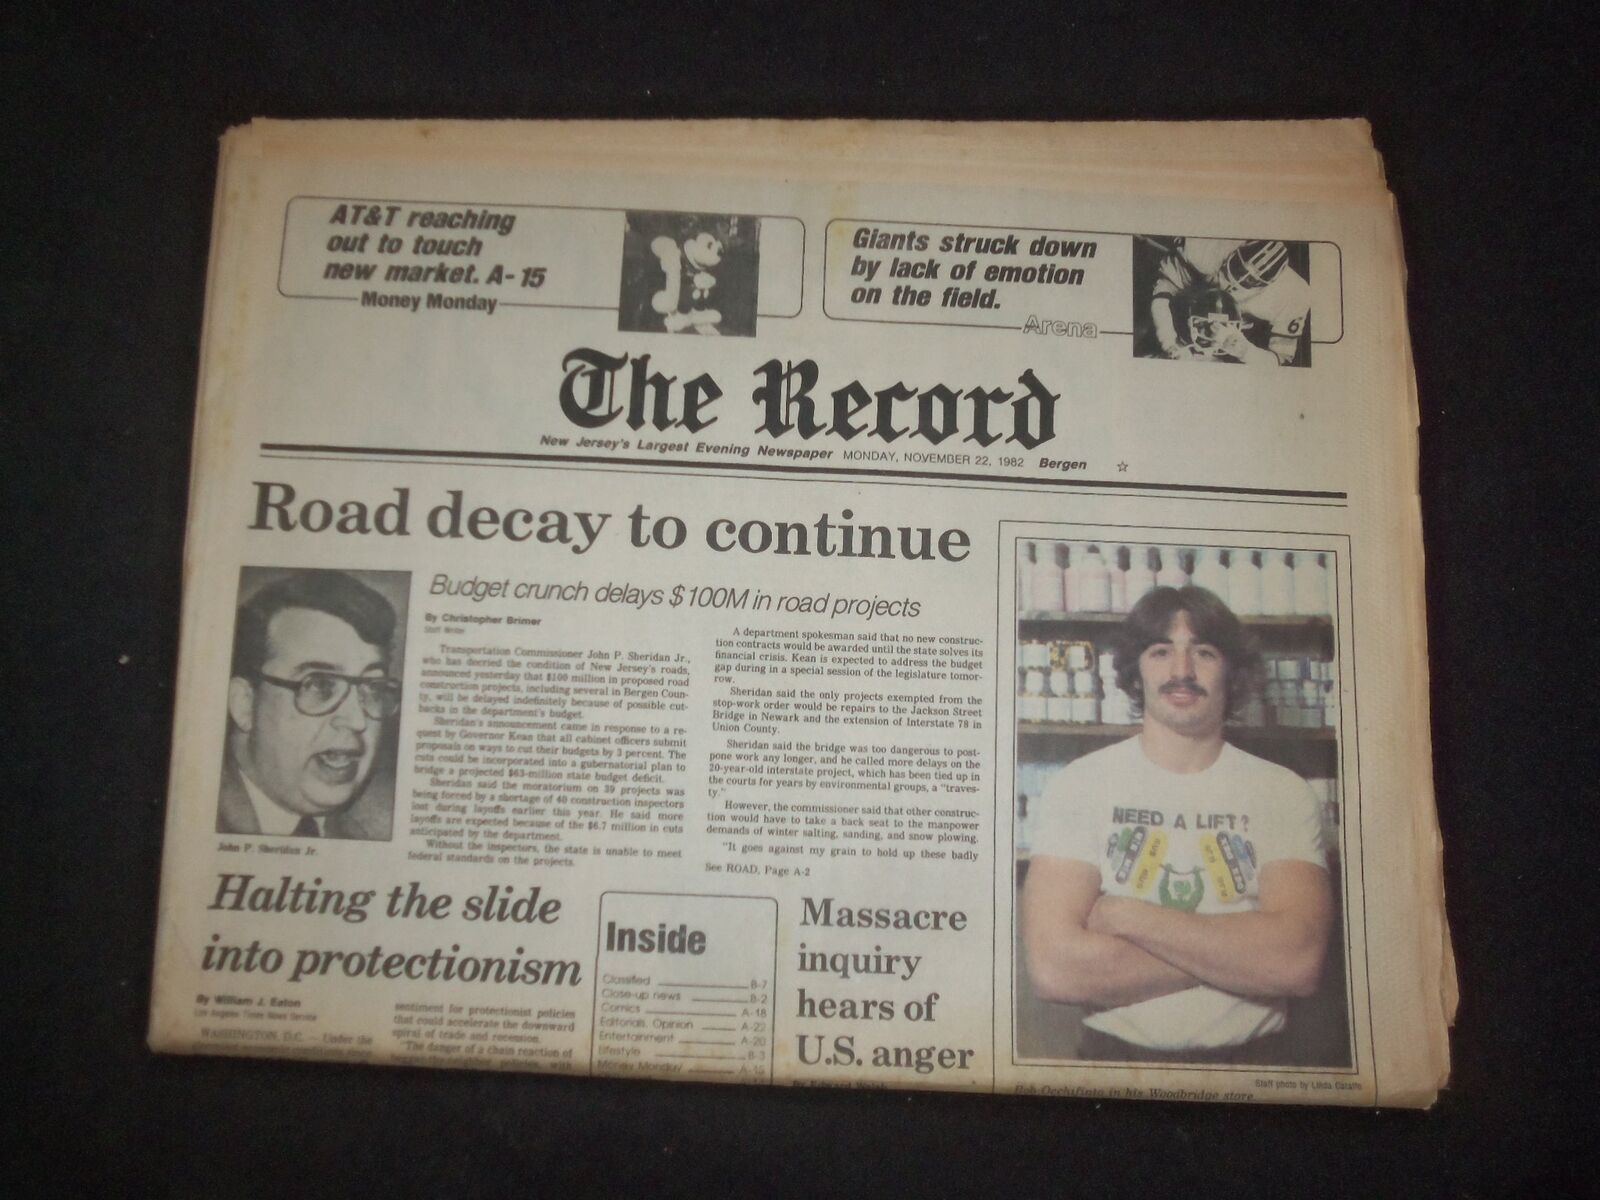 1982 NOVEMBER 22 THE RECORD-BERGEN NEWSPAPER - ROAD DECAY TO CONTINUE - NP 8304